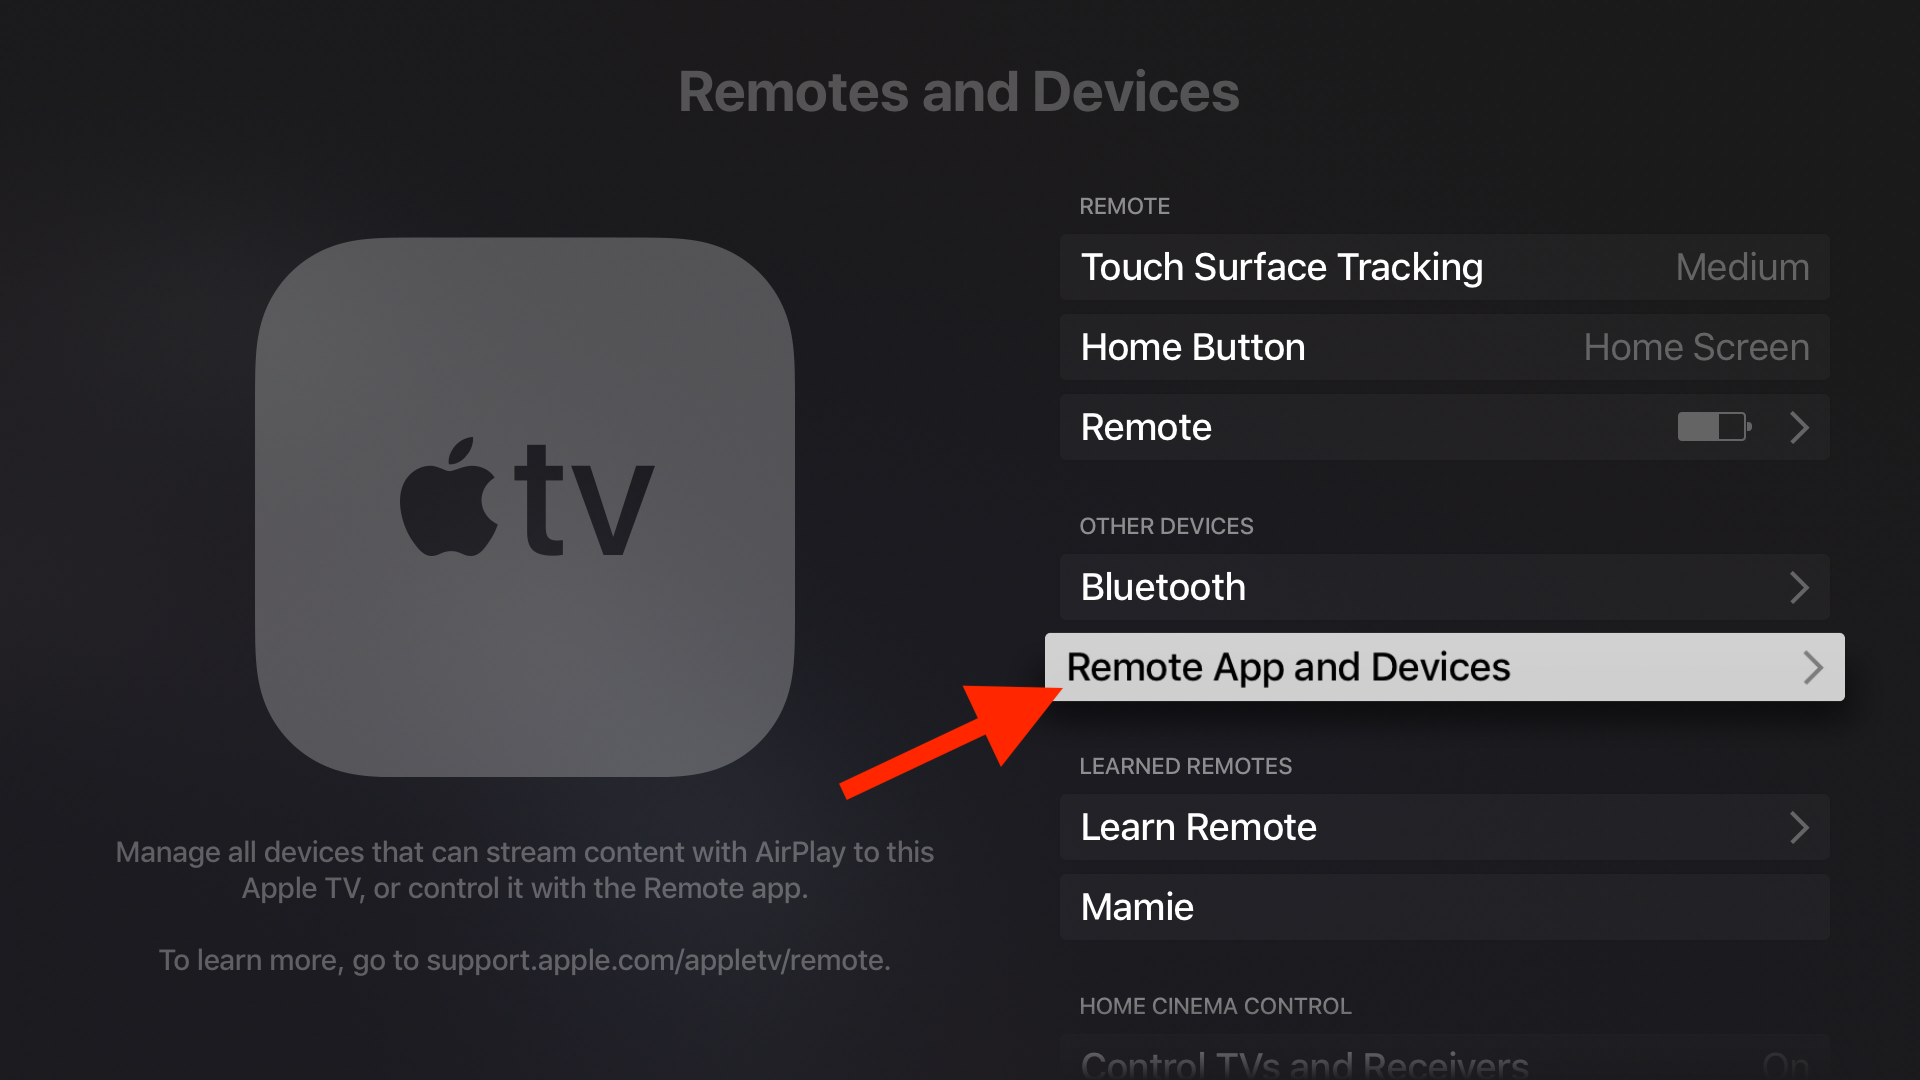 Step 3: Open "Remote App and Devices".